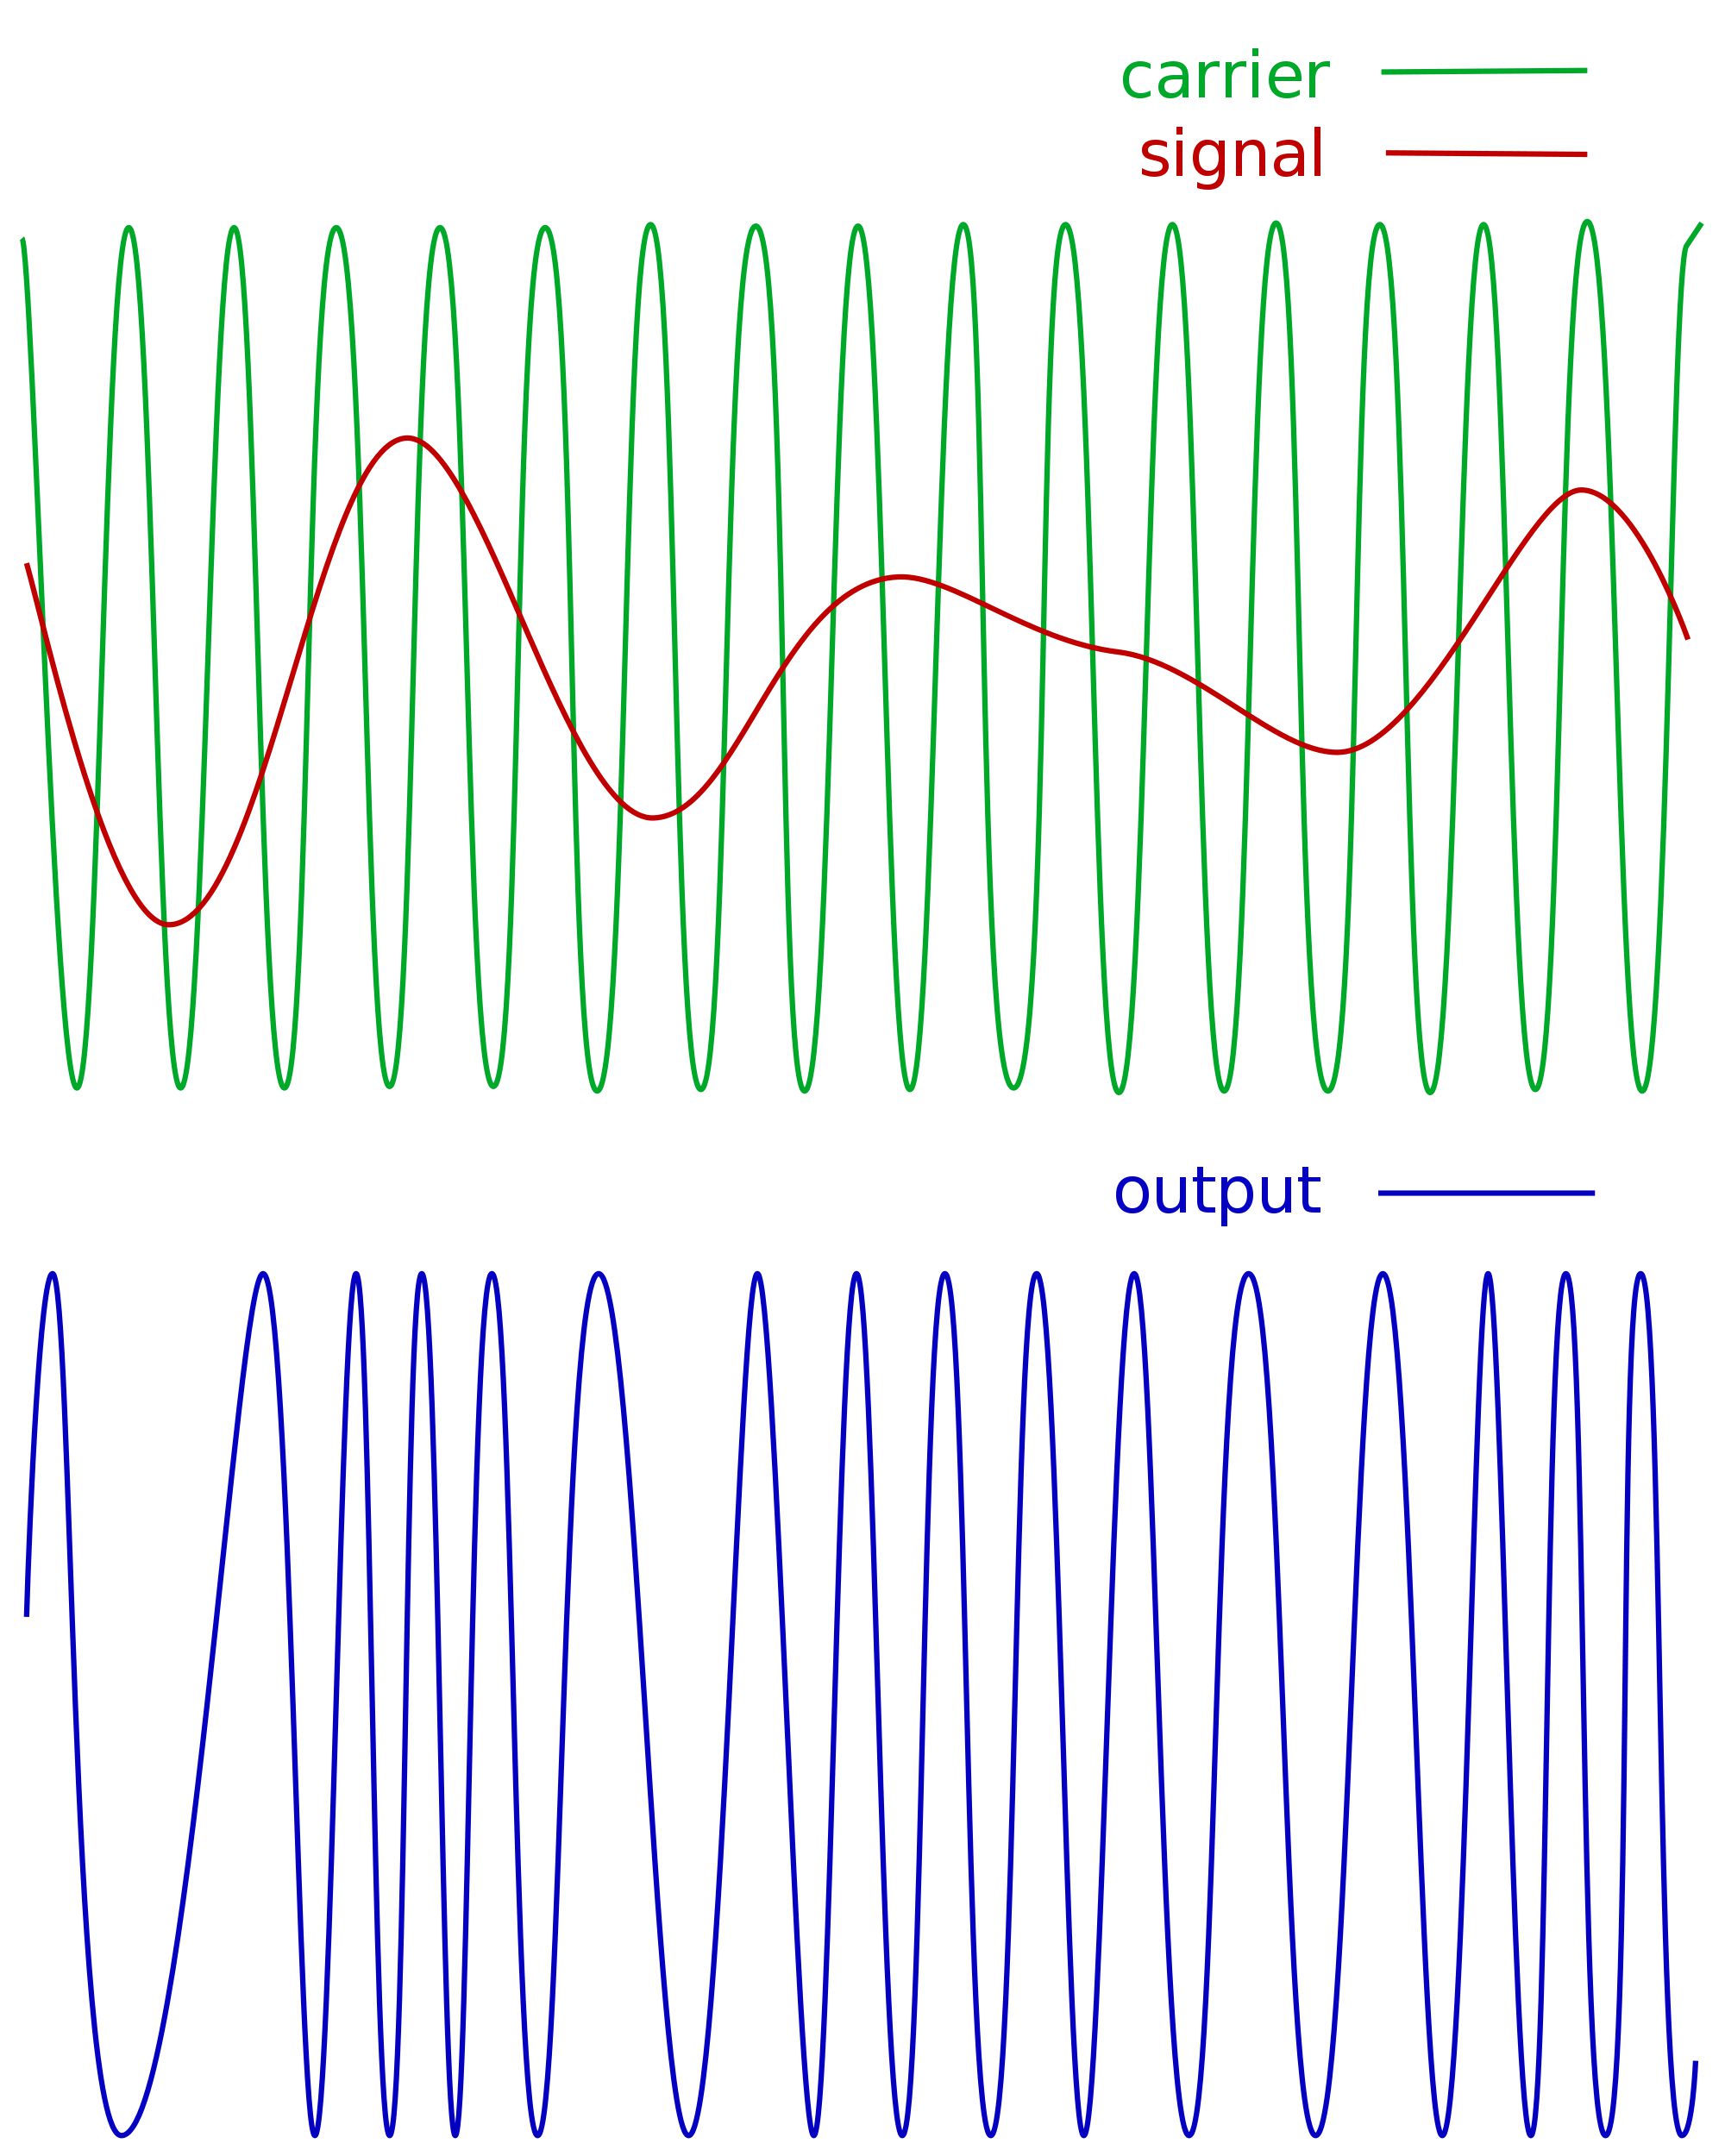 Here's what a sine wave carrier looks like, being modulated by another wave. (Image from http://commons.wikimedia.org/wiki/File:Frequency-modulation.png)